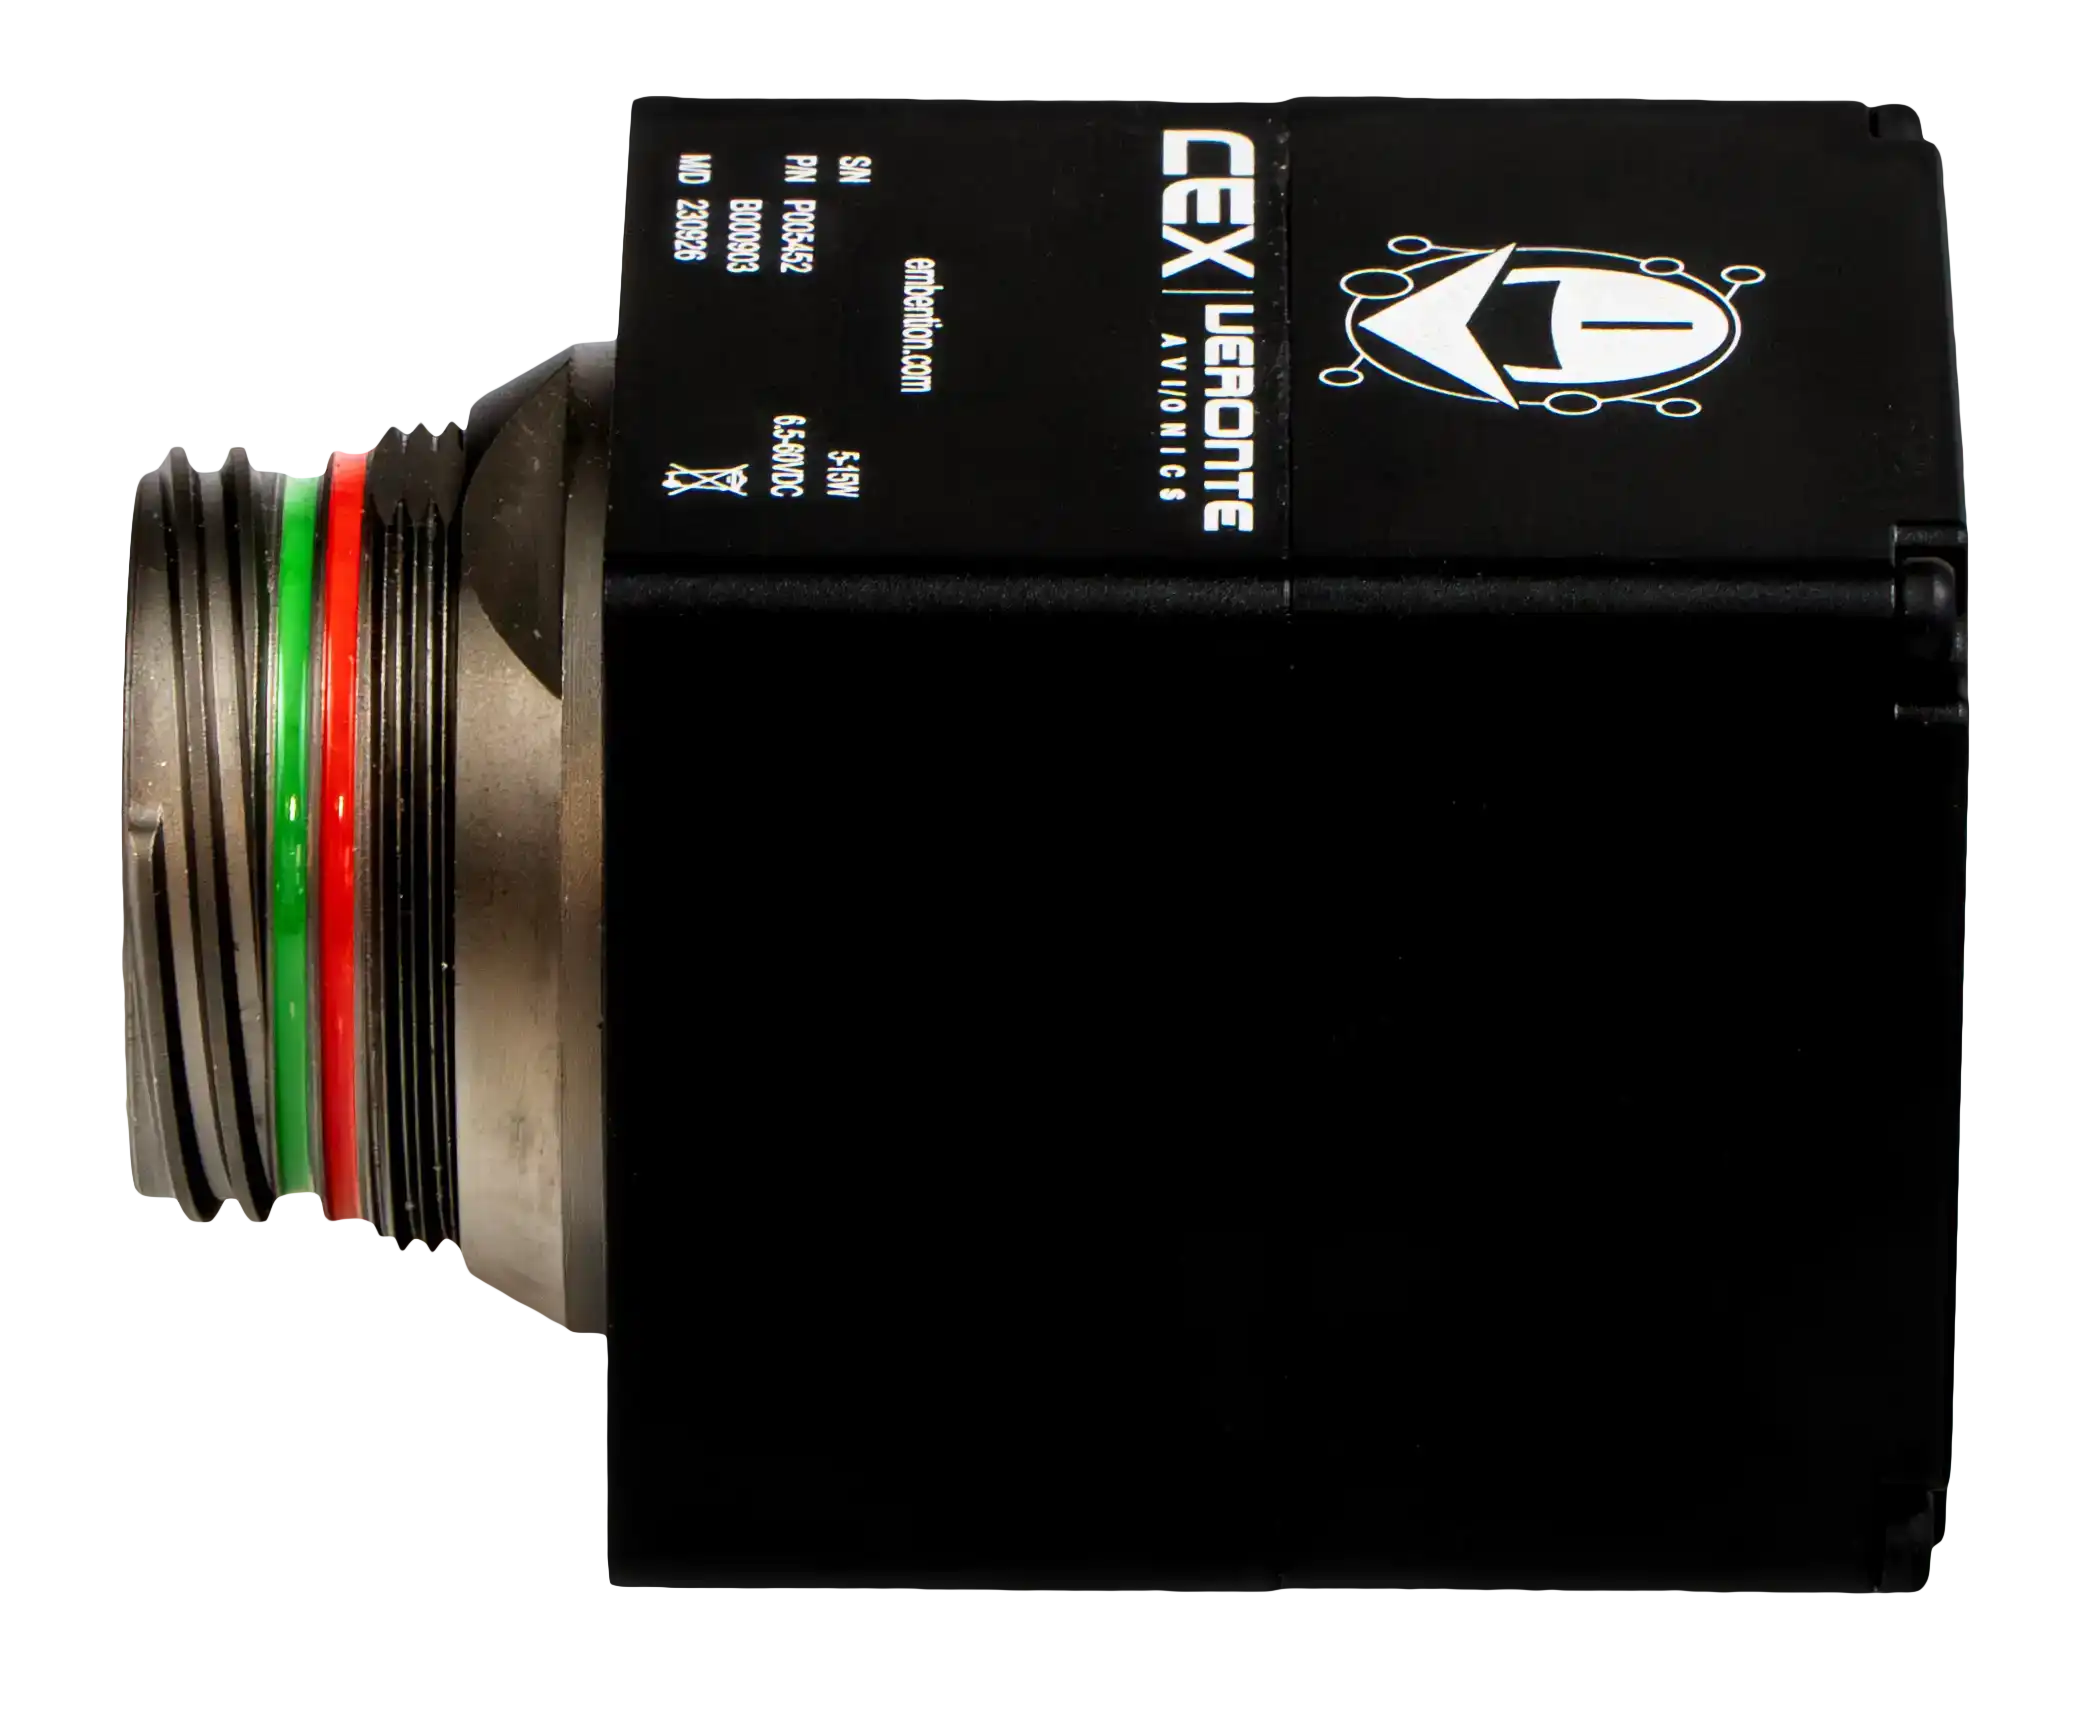 The image features an aviation circular connector labeled "CEX | Veronte Avionics" by Embention, showcasing a multi-pin design and color-coded rings on a robust metallic interface.